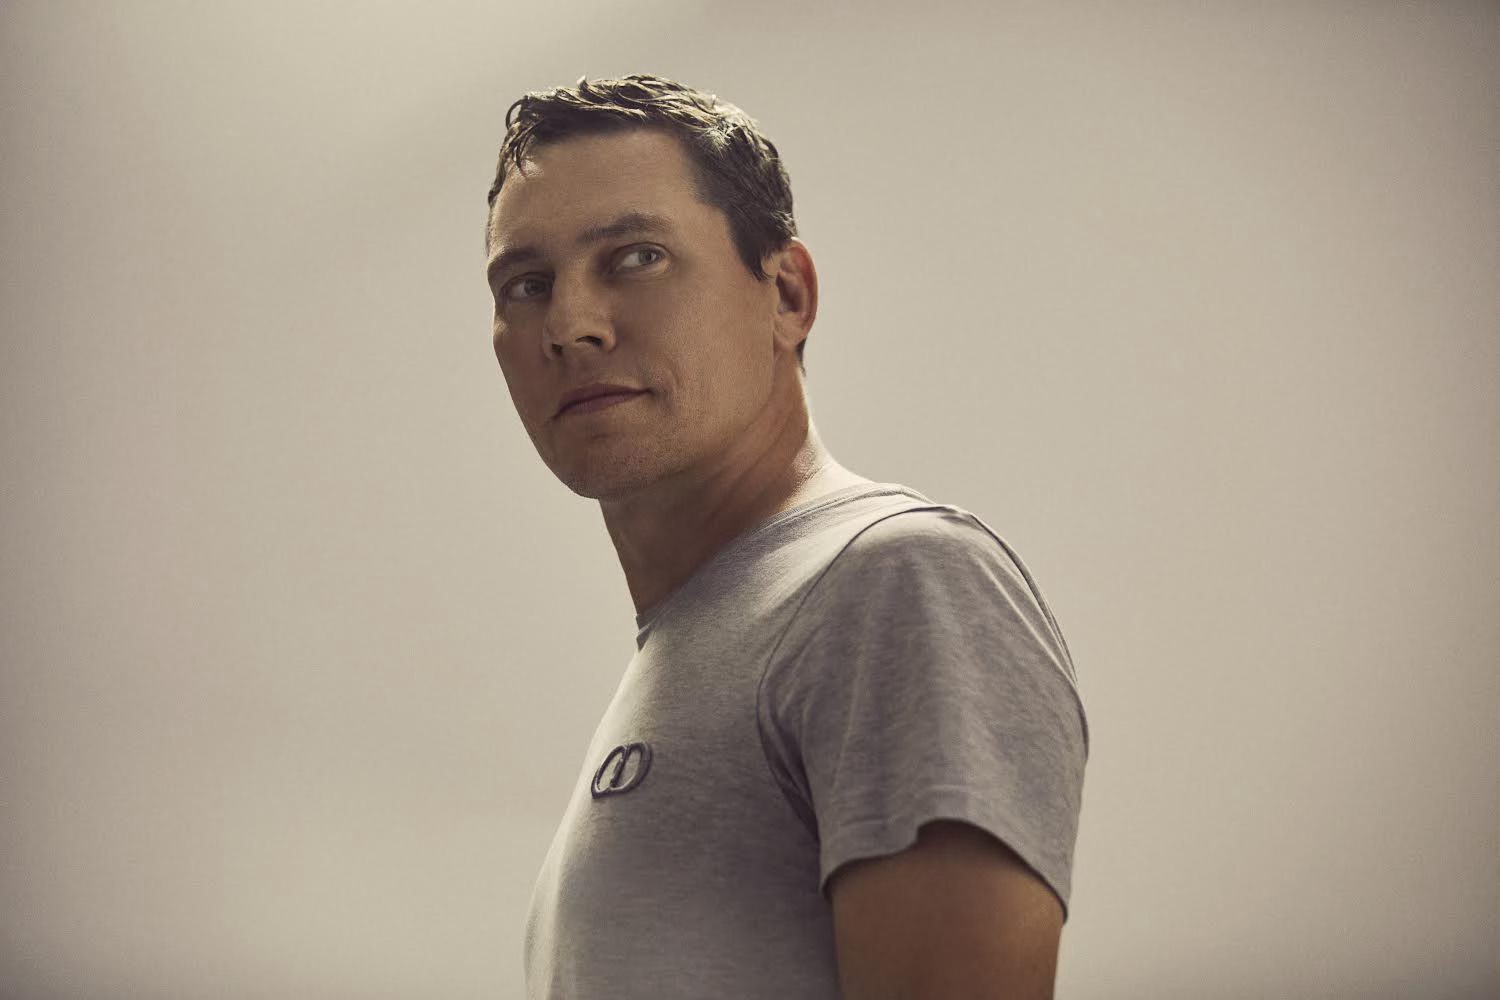 “The Greatest DJ of All Time”, Tiësto is Coming to WTR Tampa this Sunday, April 25th